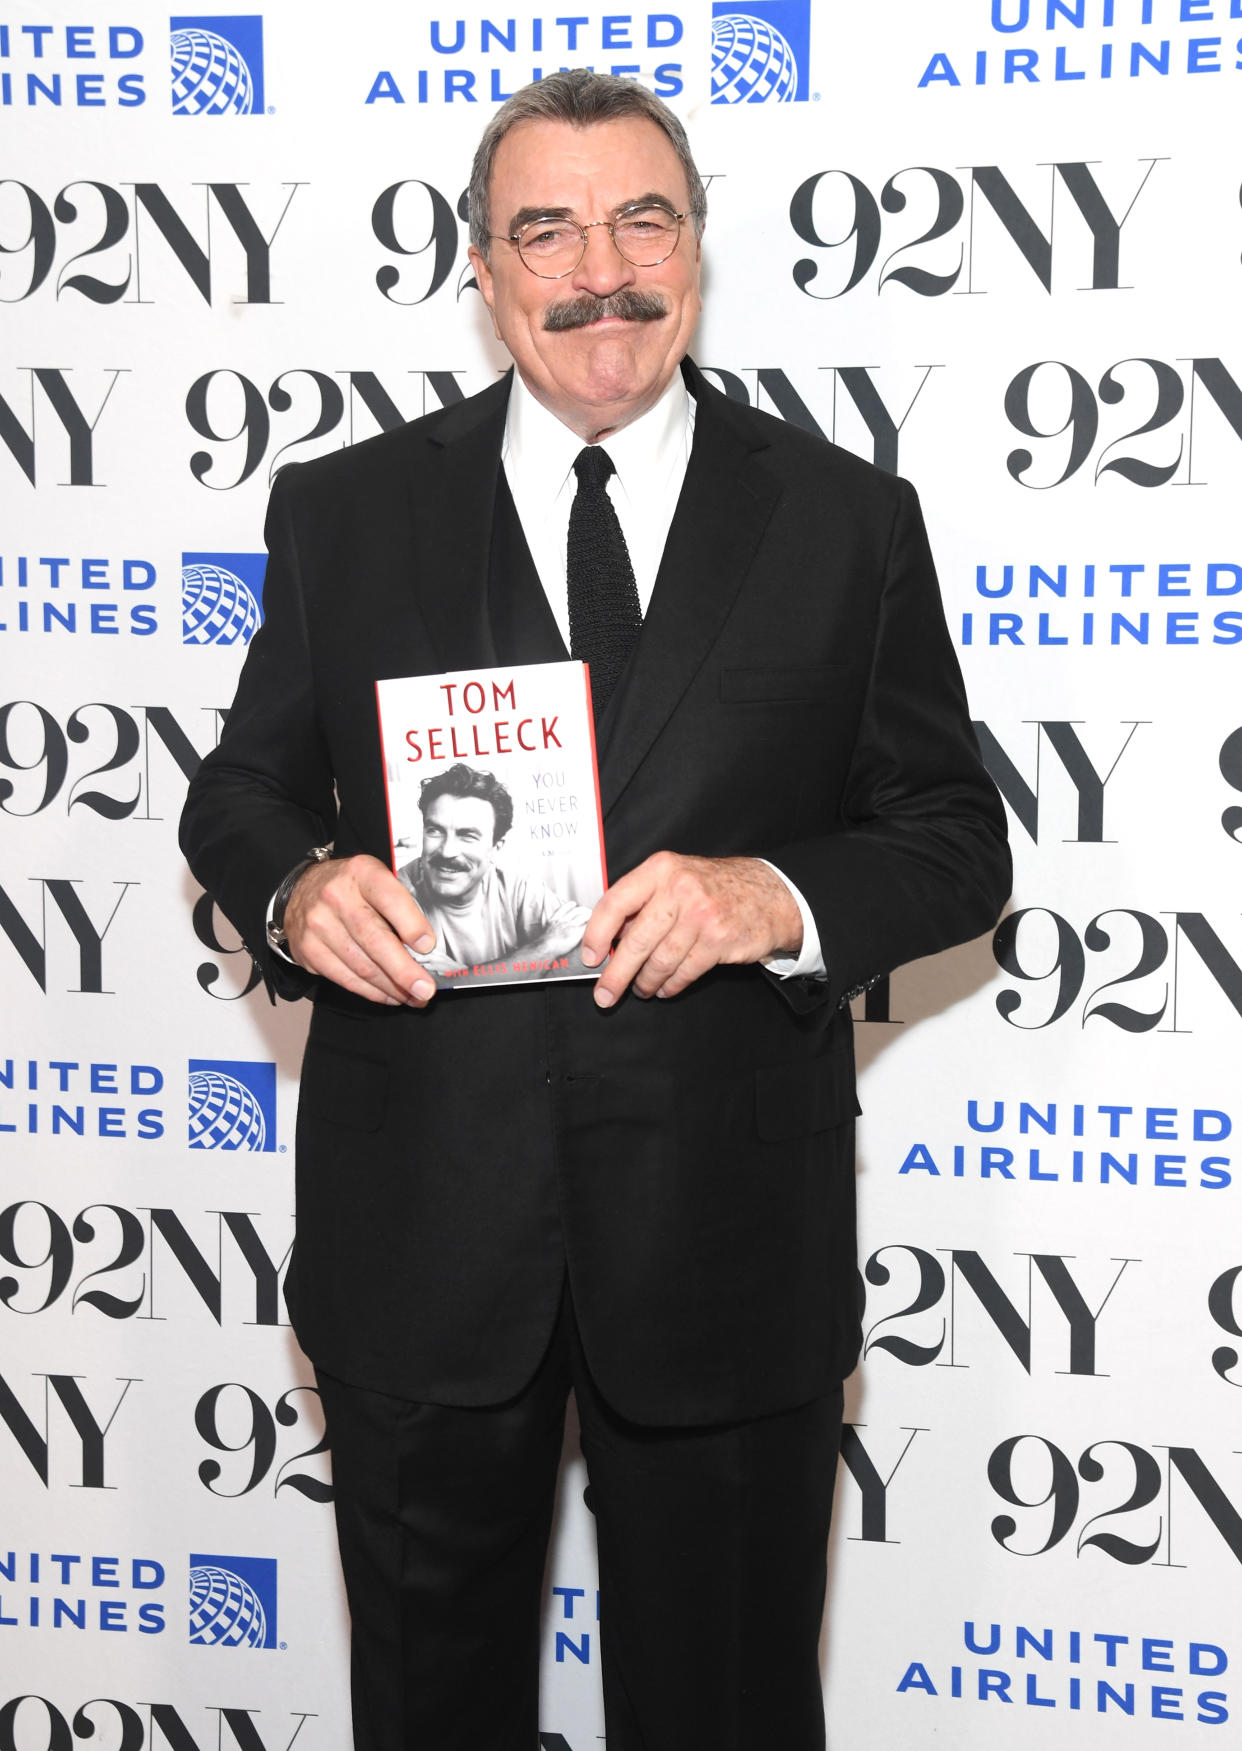 NEW YORK, NEW YORK - MAY 07: Tom Selleck attends a discussion for the book, 